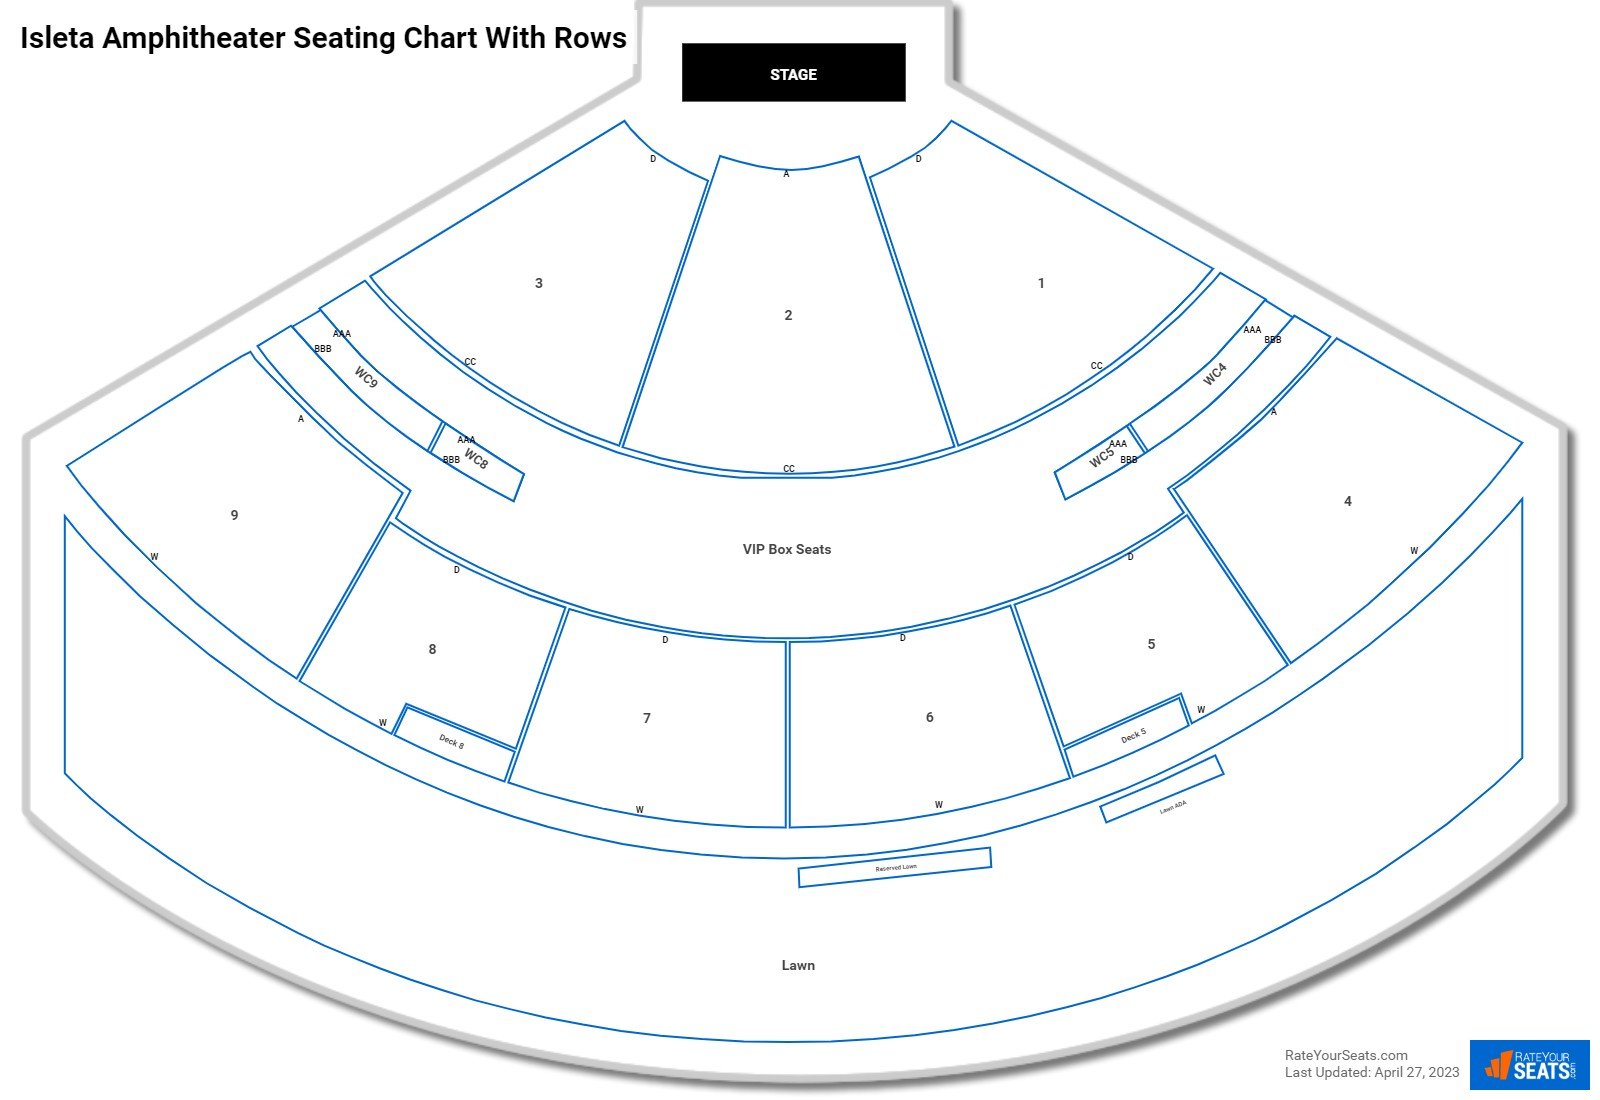 Isleta Amphitheater seating chart with row numbers